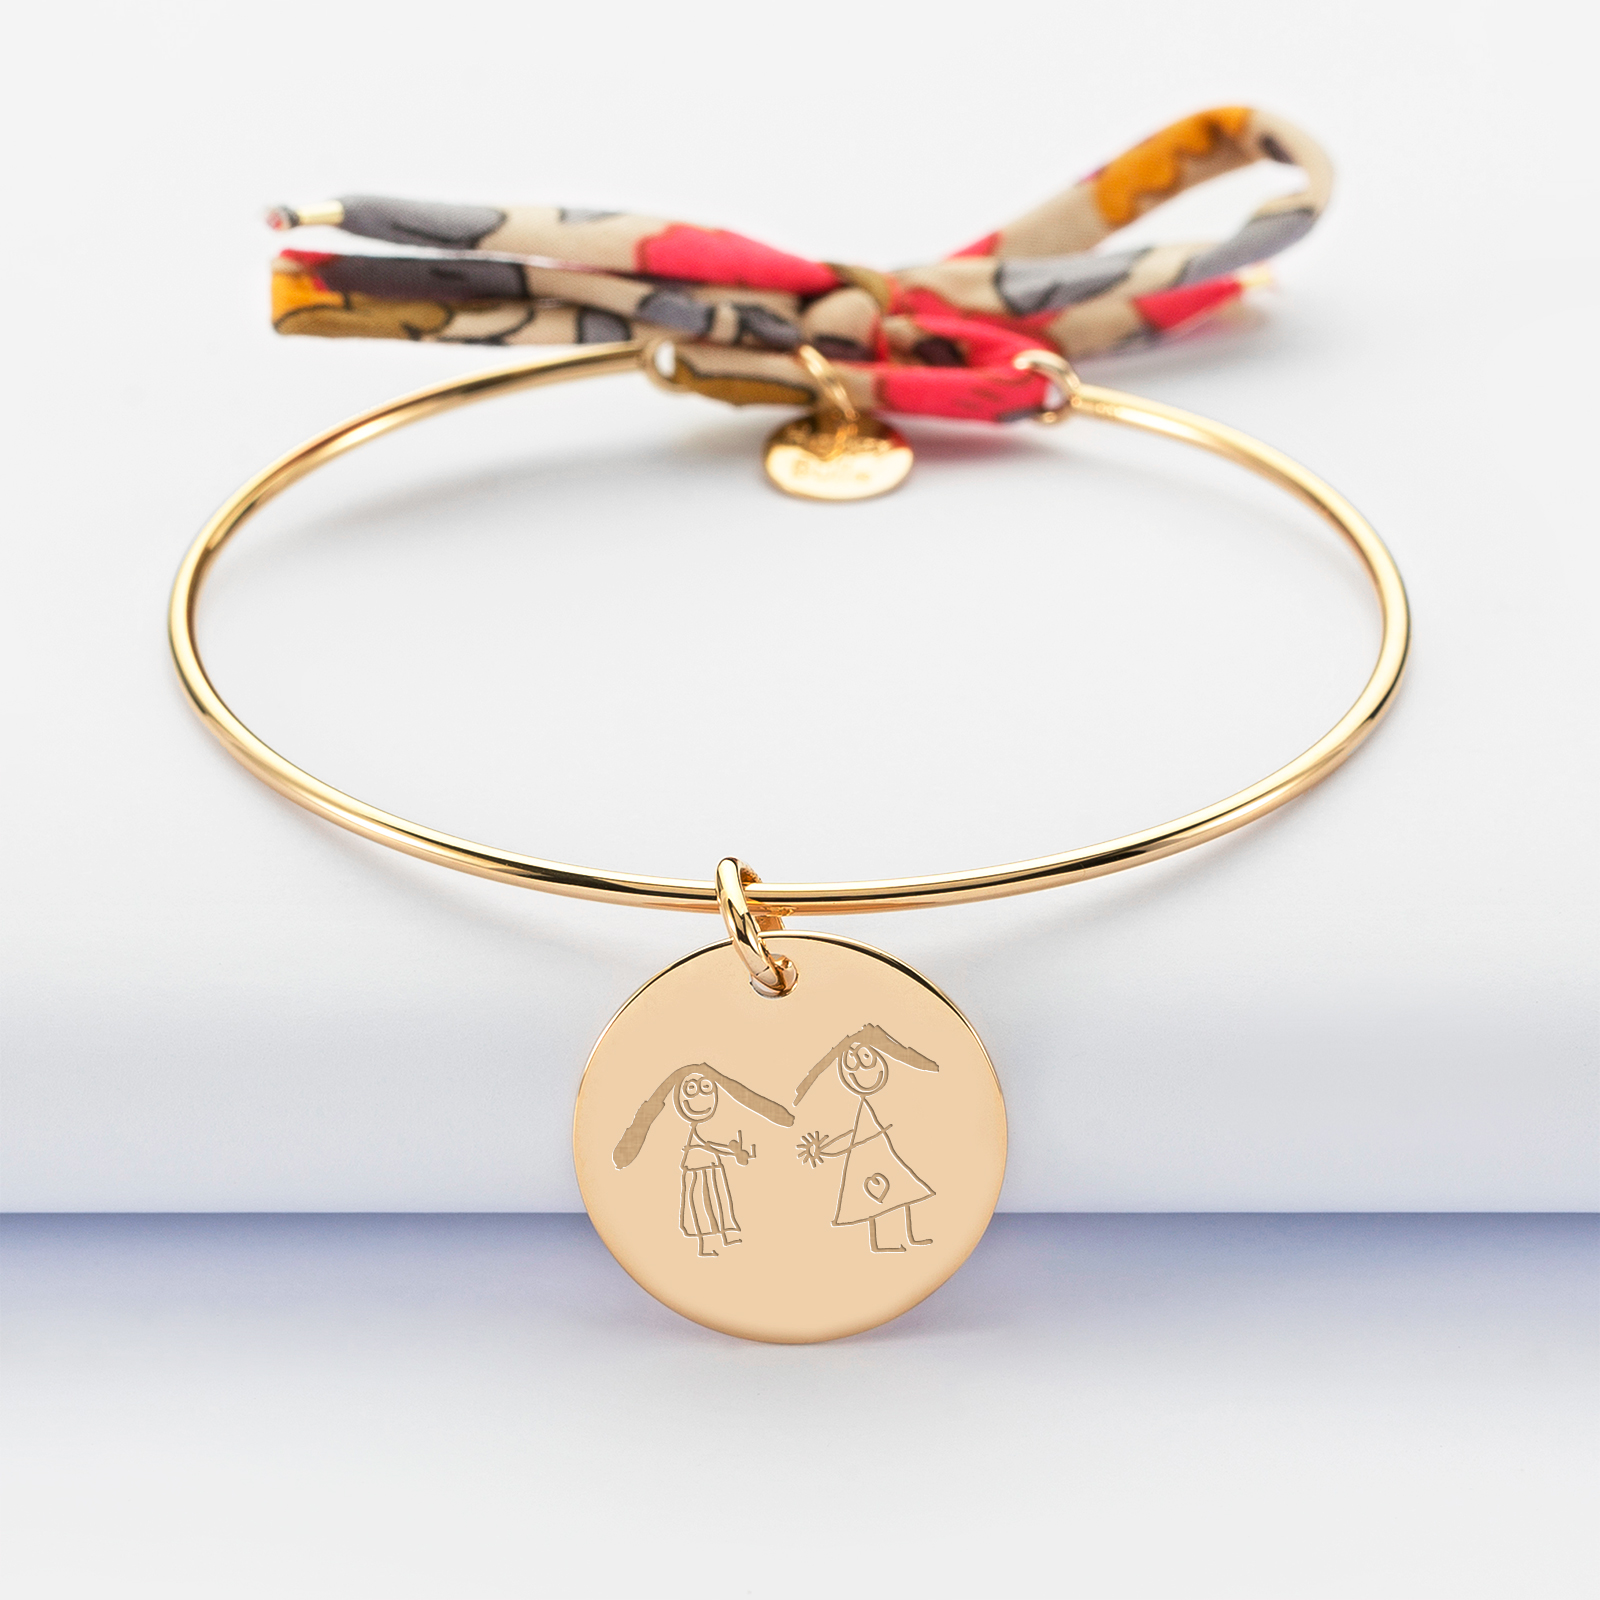 Personalised gold plate bangle with Liberty cord and 19 mm engraved medallion - sketch